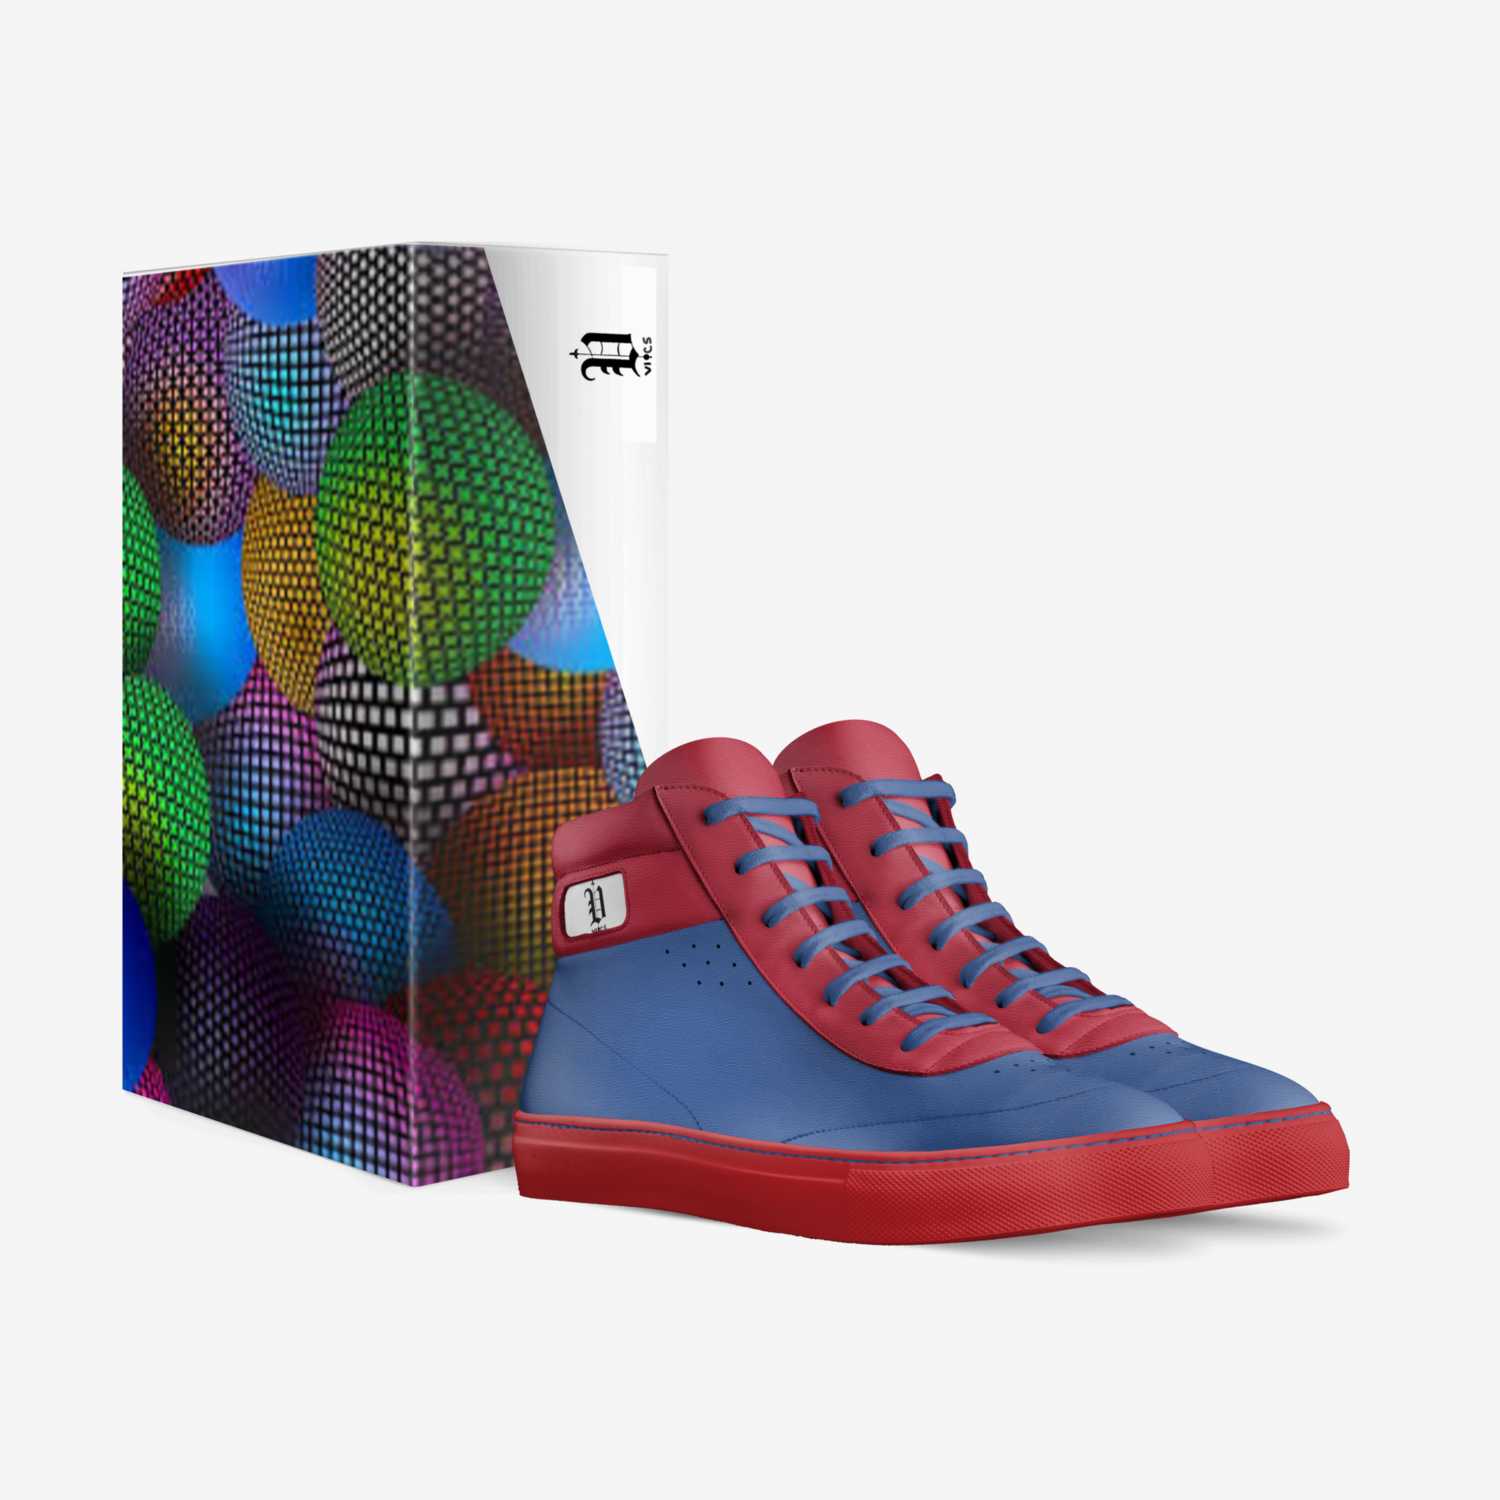 Vics 3d custom made in Italy shoes by Brayden Murphy | Box view